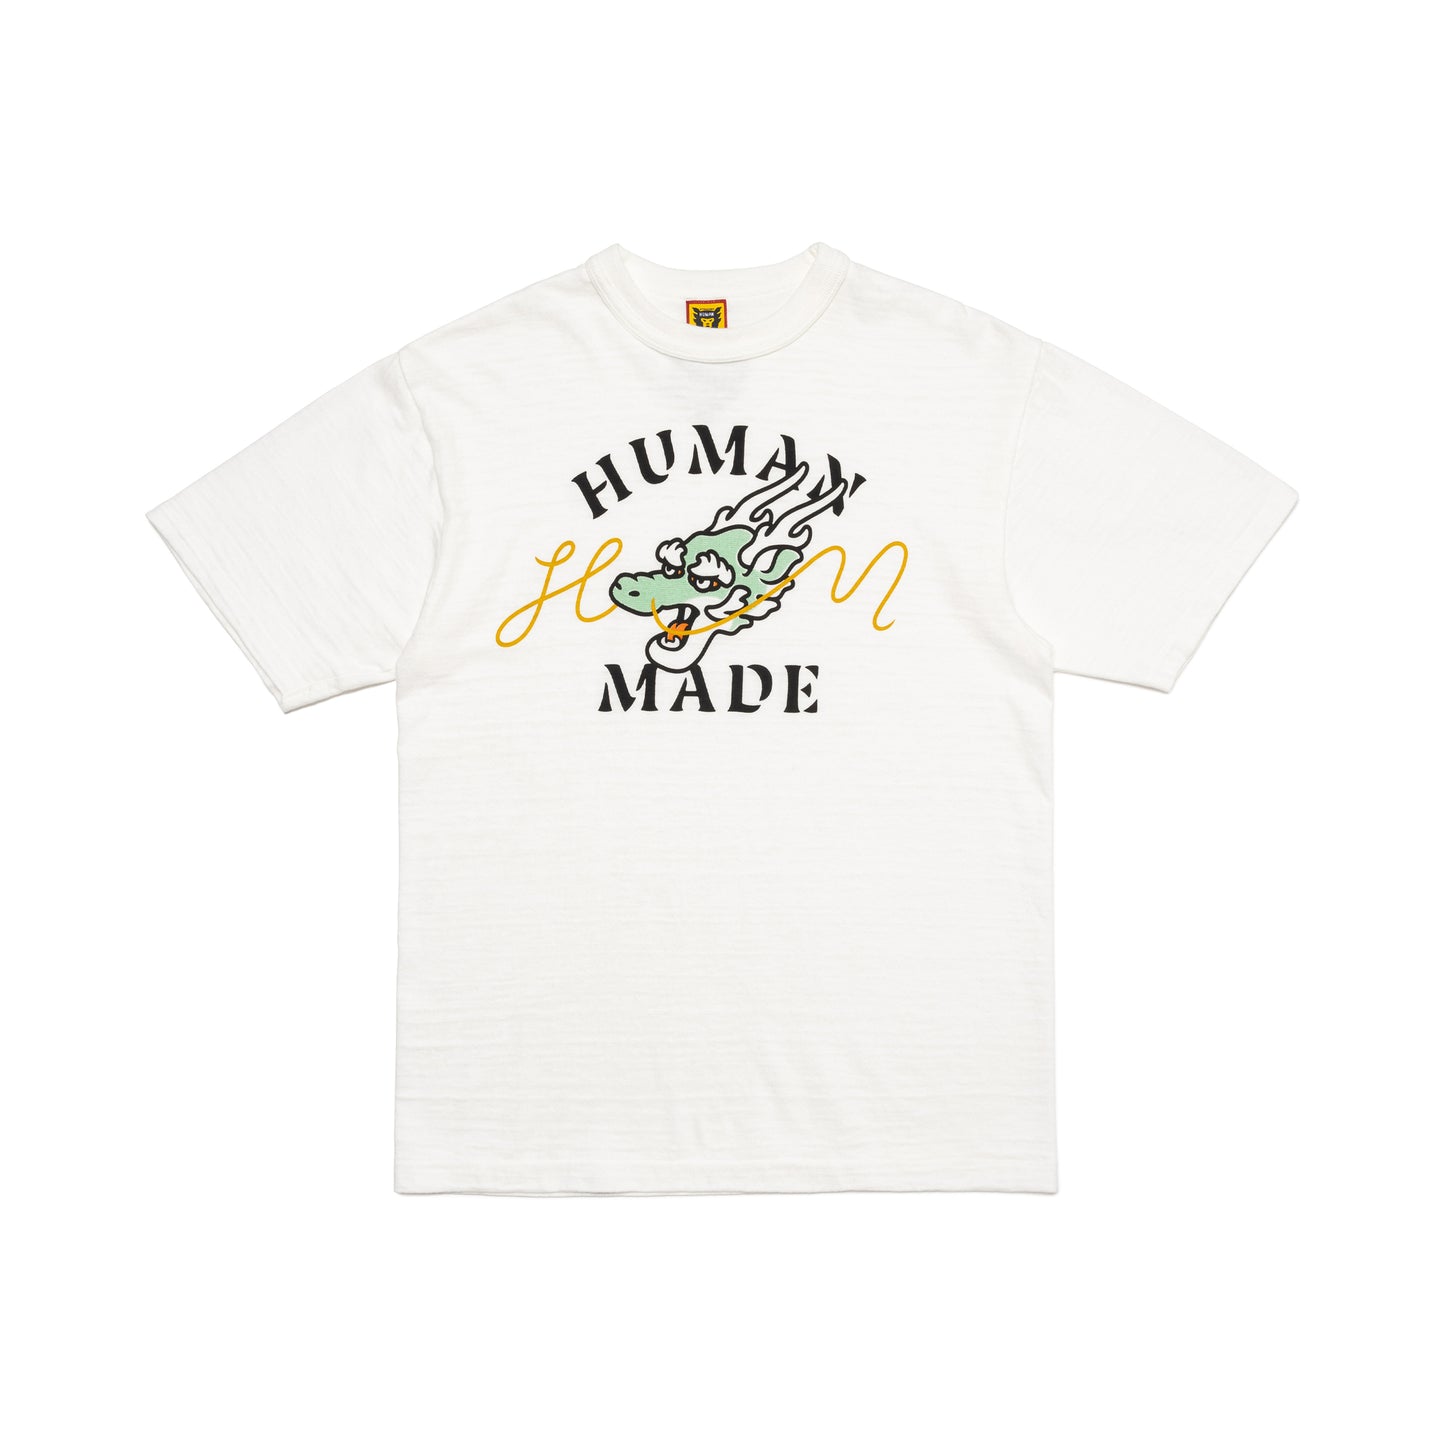 GRAPHIC T-SHIRT #01 – HUMAN MADE ONLINE STORE